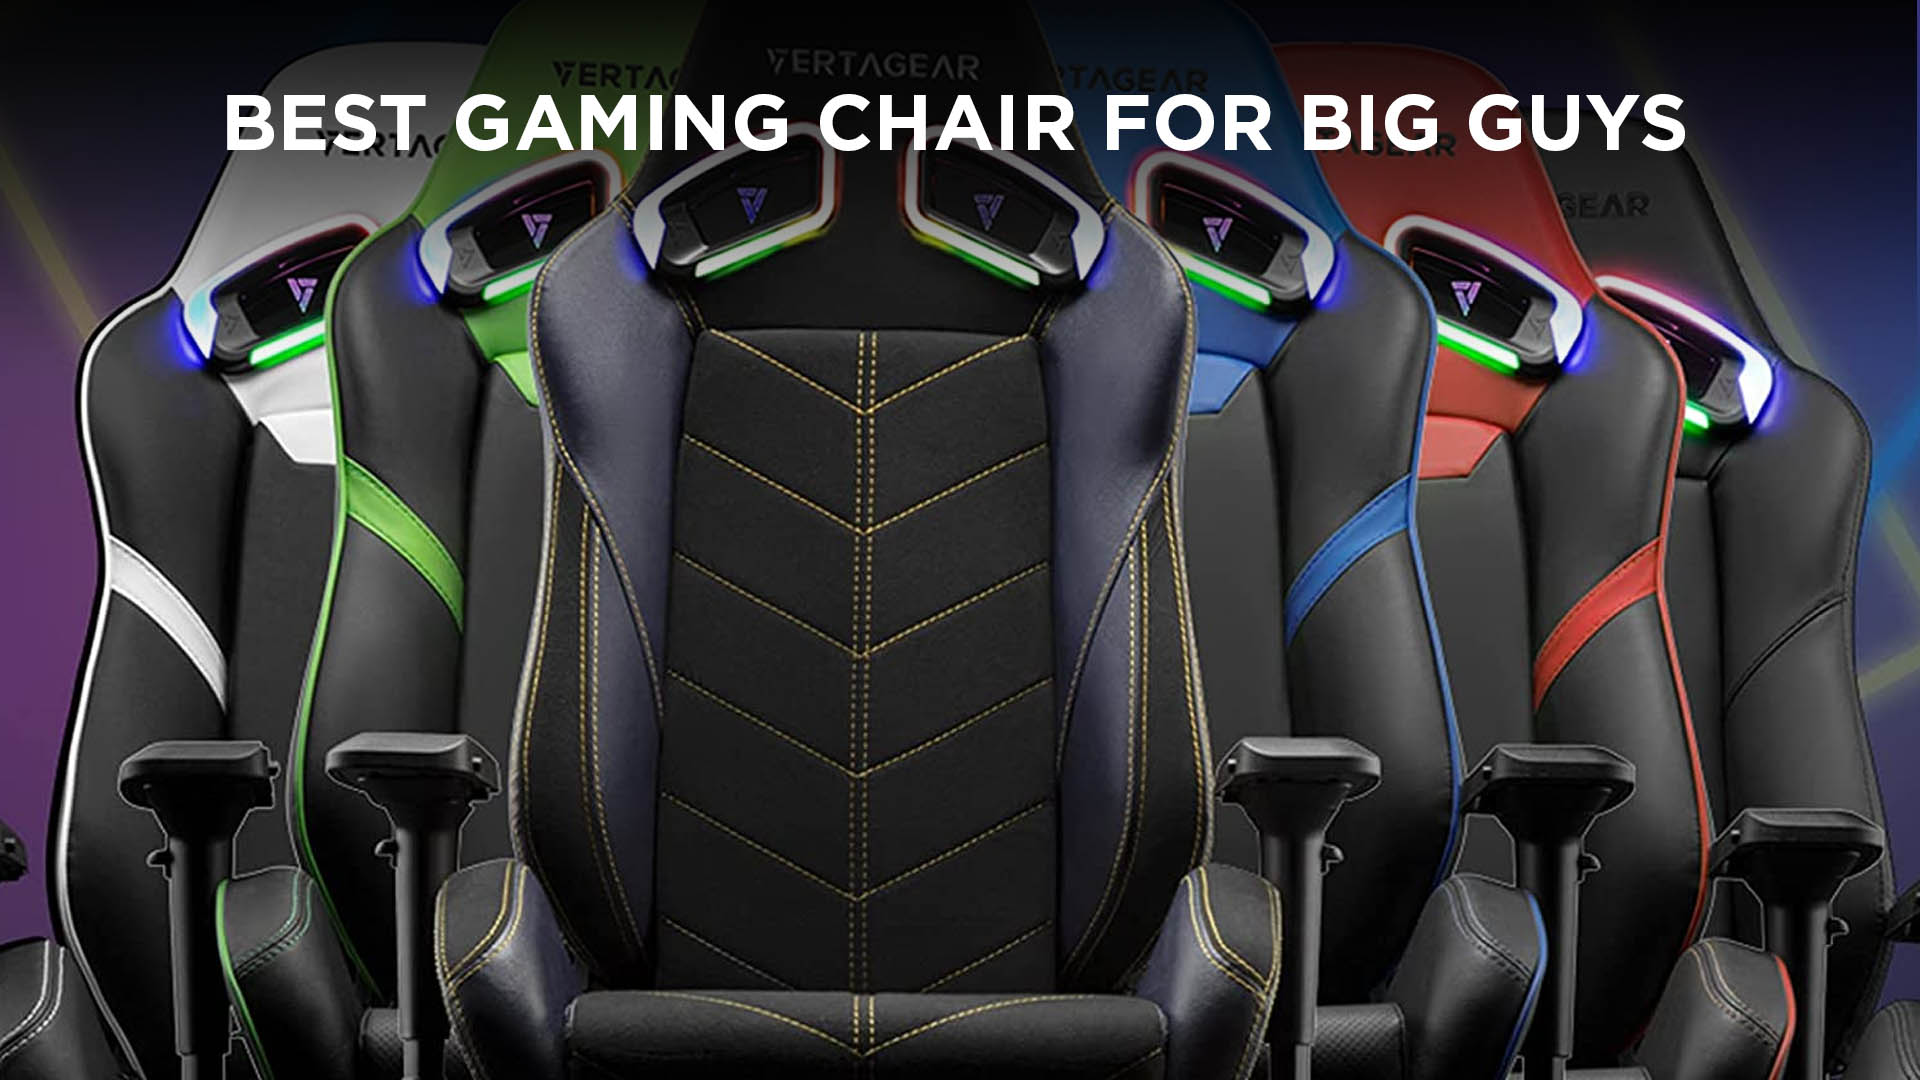 BEST GAMING CHAIR FOR BIG GUYS 